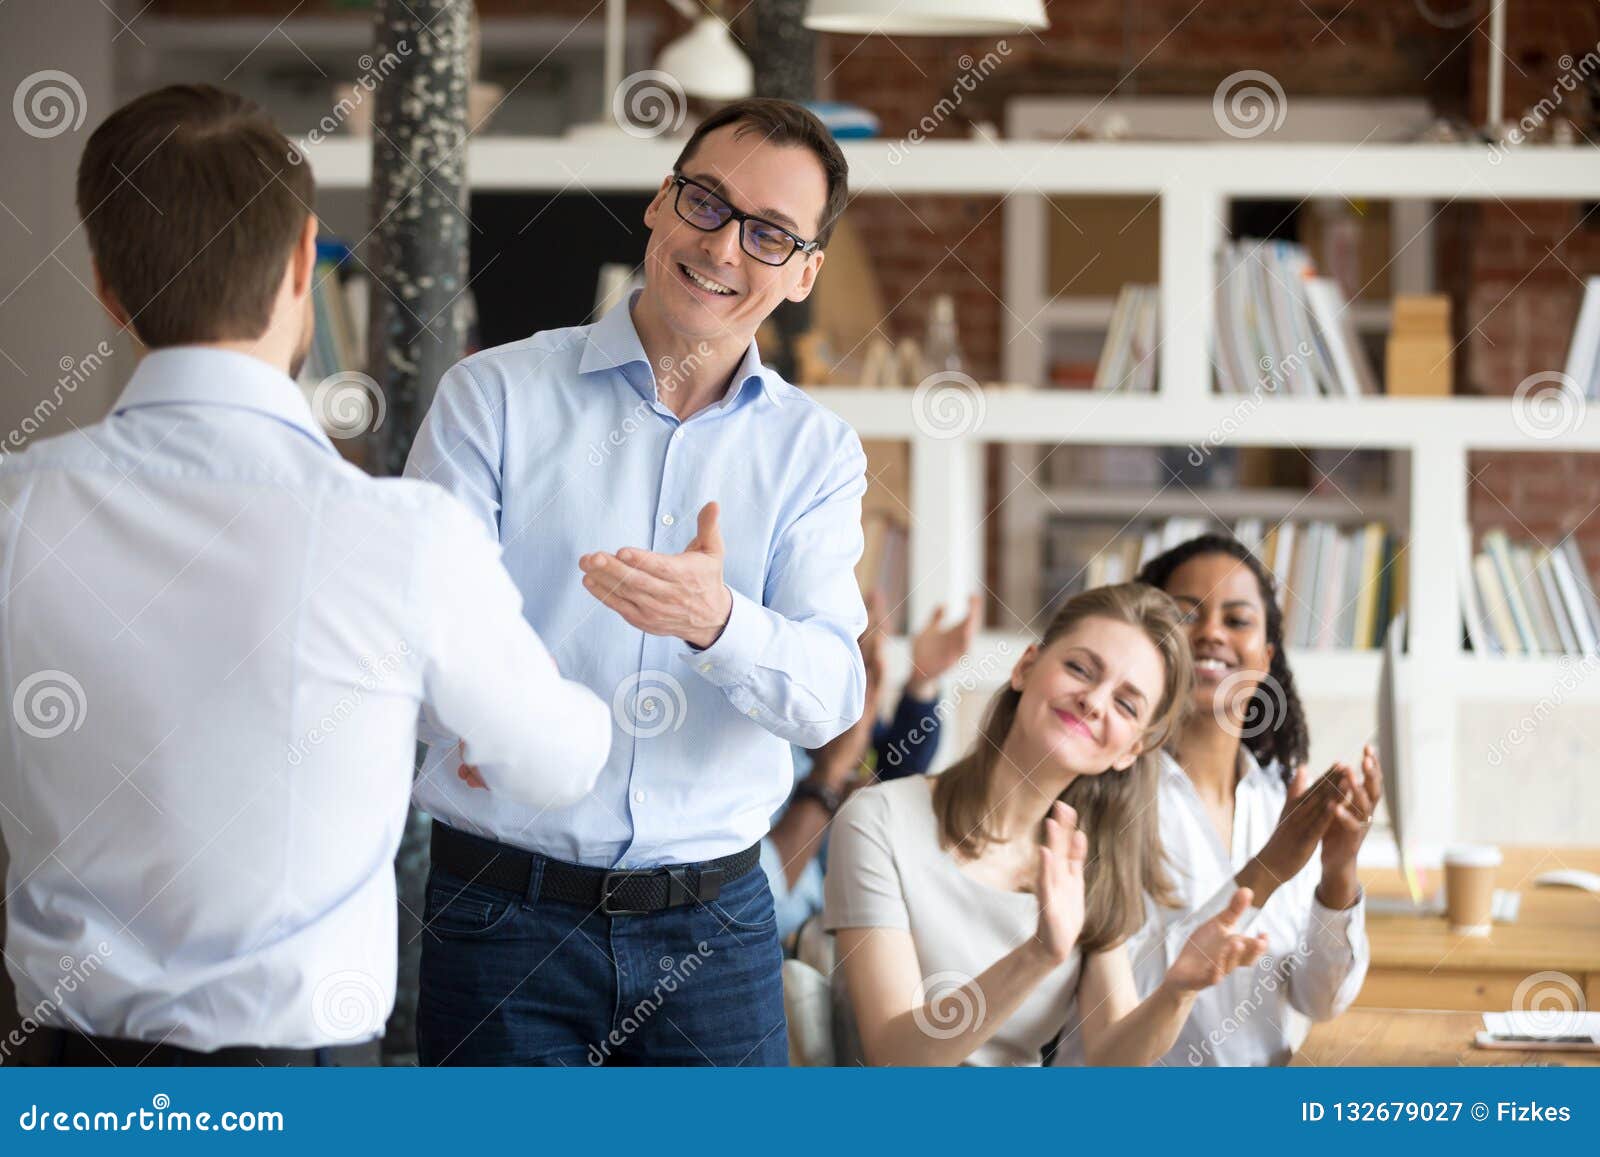 middle aged boss, mentor congratulating employee, shaking hand